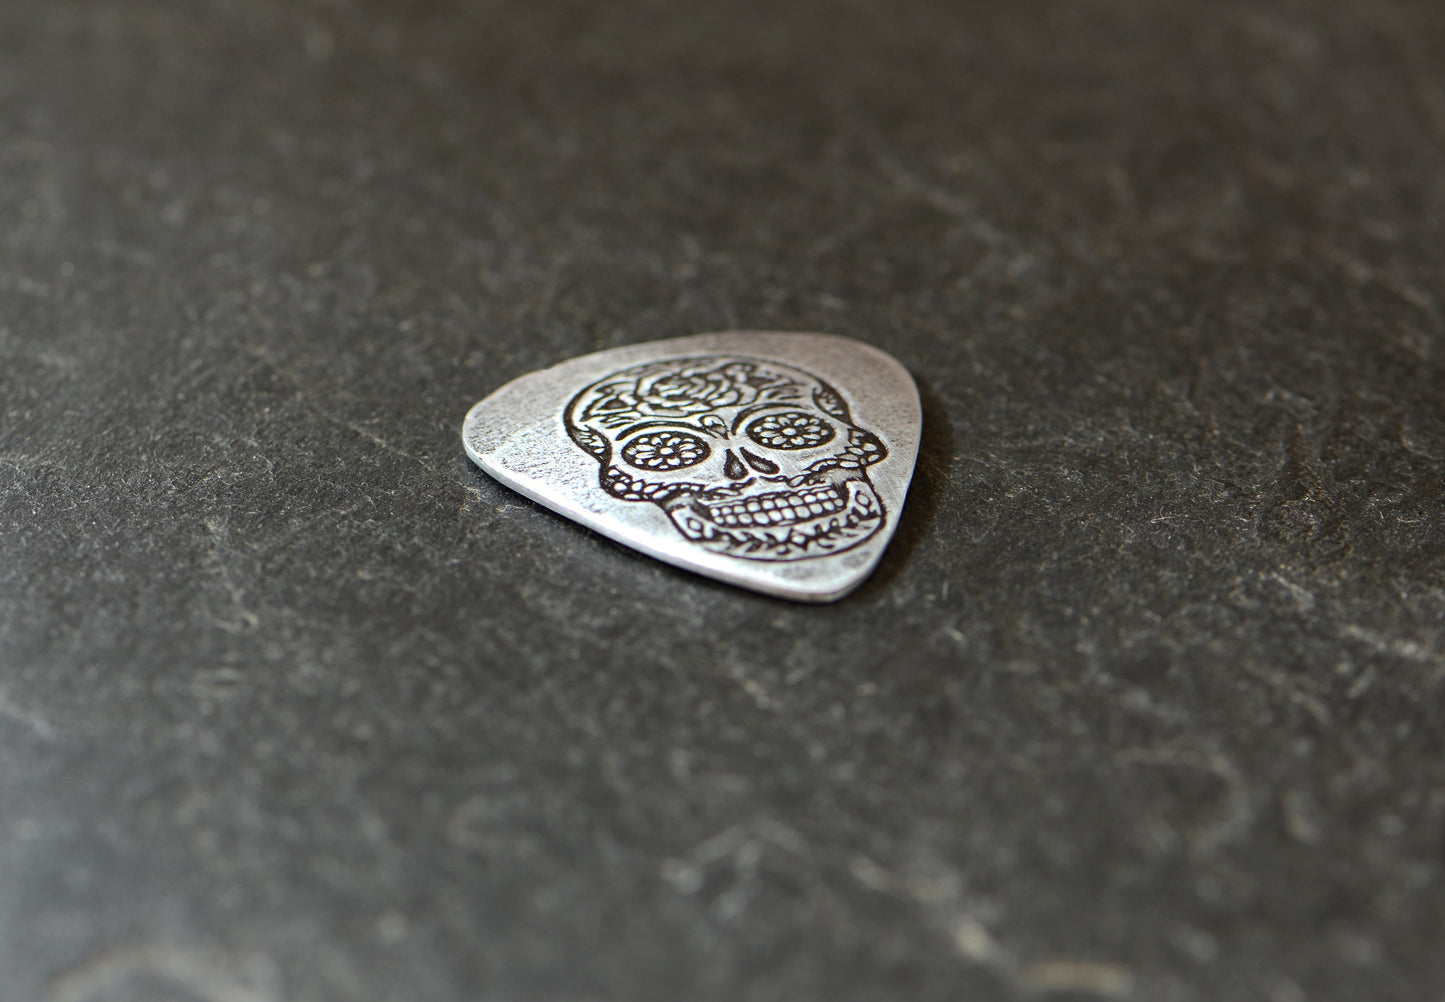 Sugar skull day of the dead sterling silver guitar pick